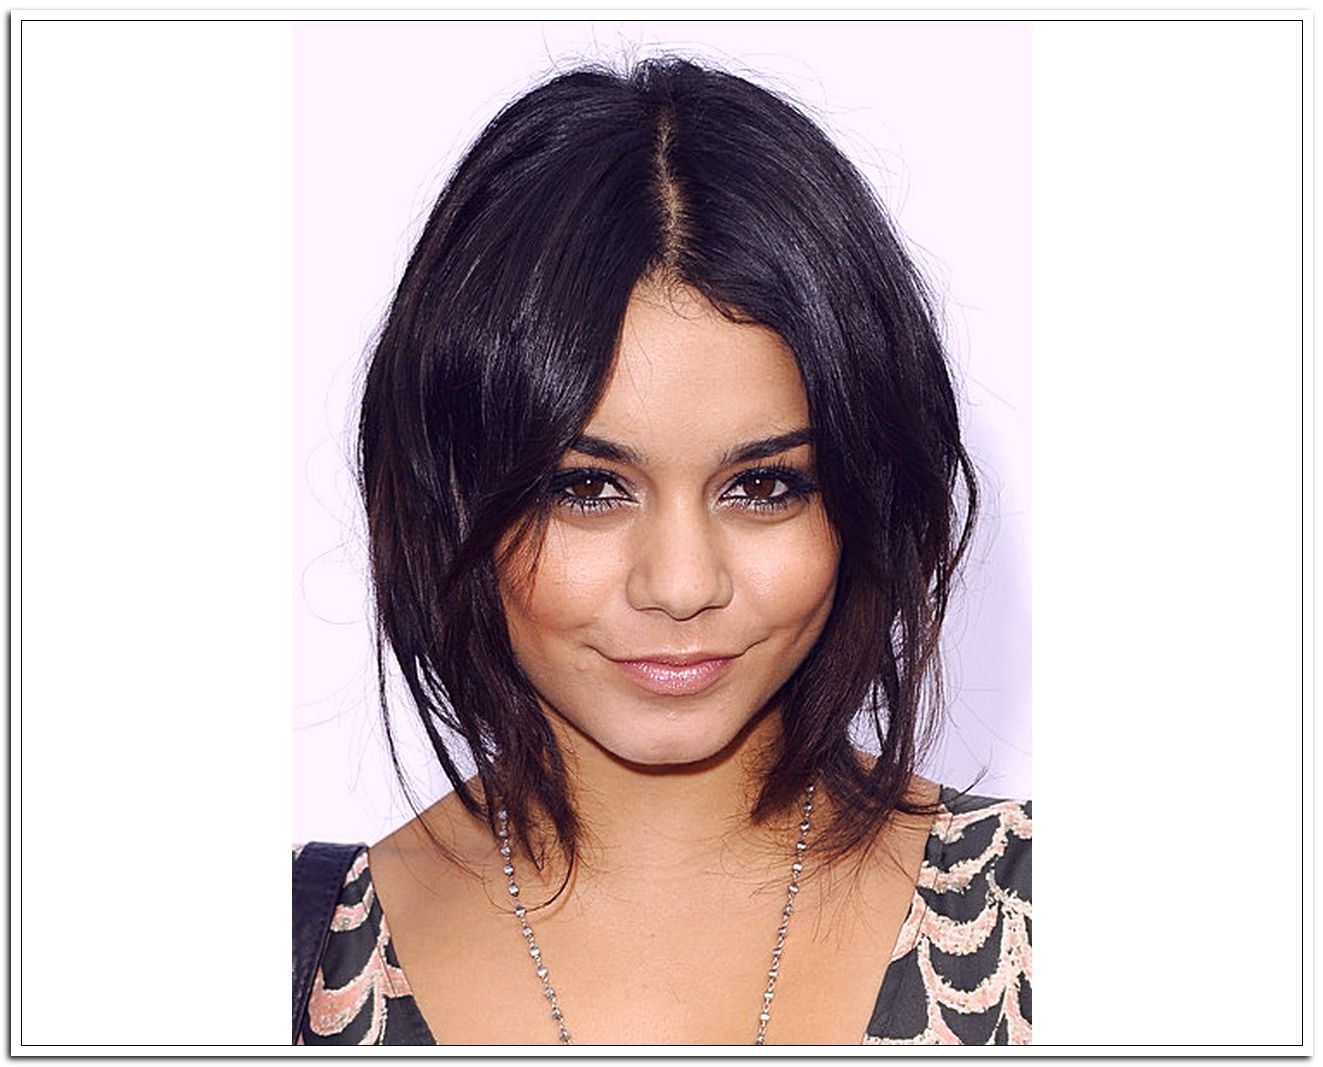 Latest Vanessa Hudgens Celebrity Haircuts | Latest Hairstyles Pertaining To Vanessa Hudgens Short Haircuts (View 14 of 25)